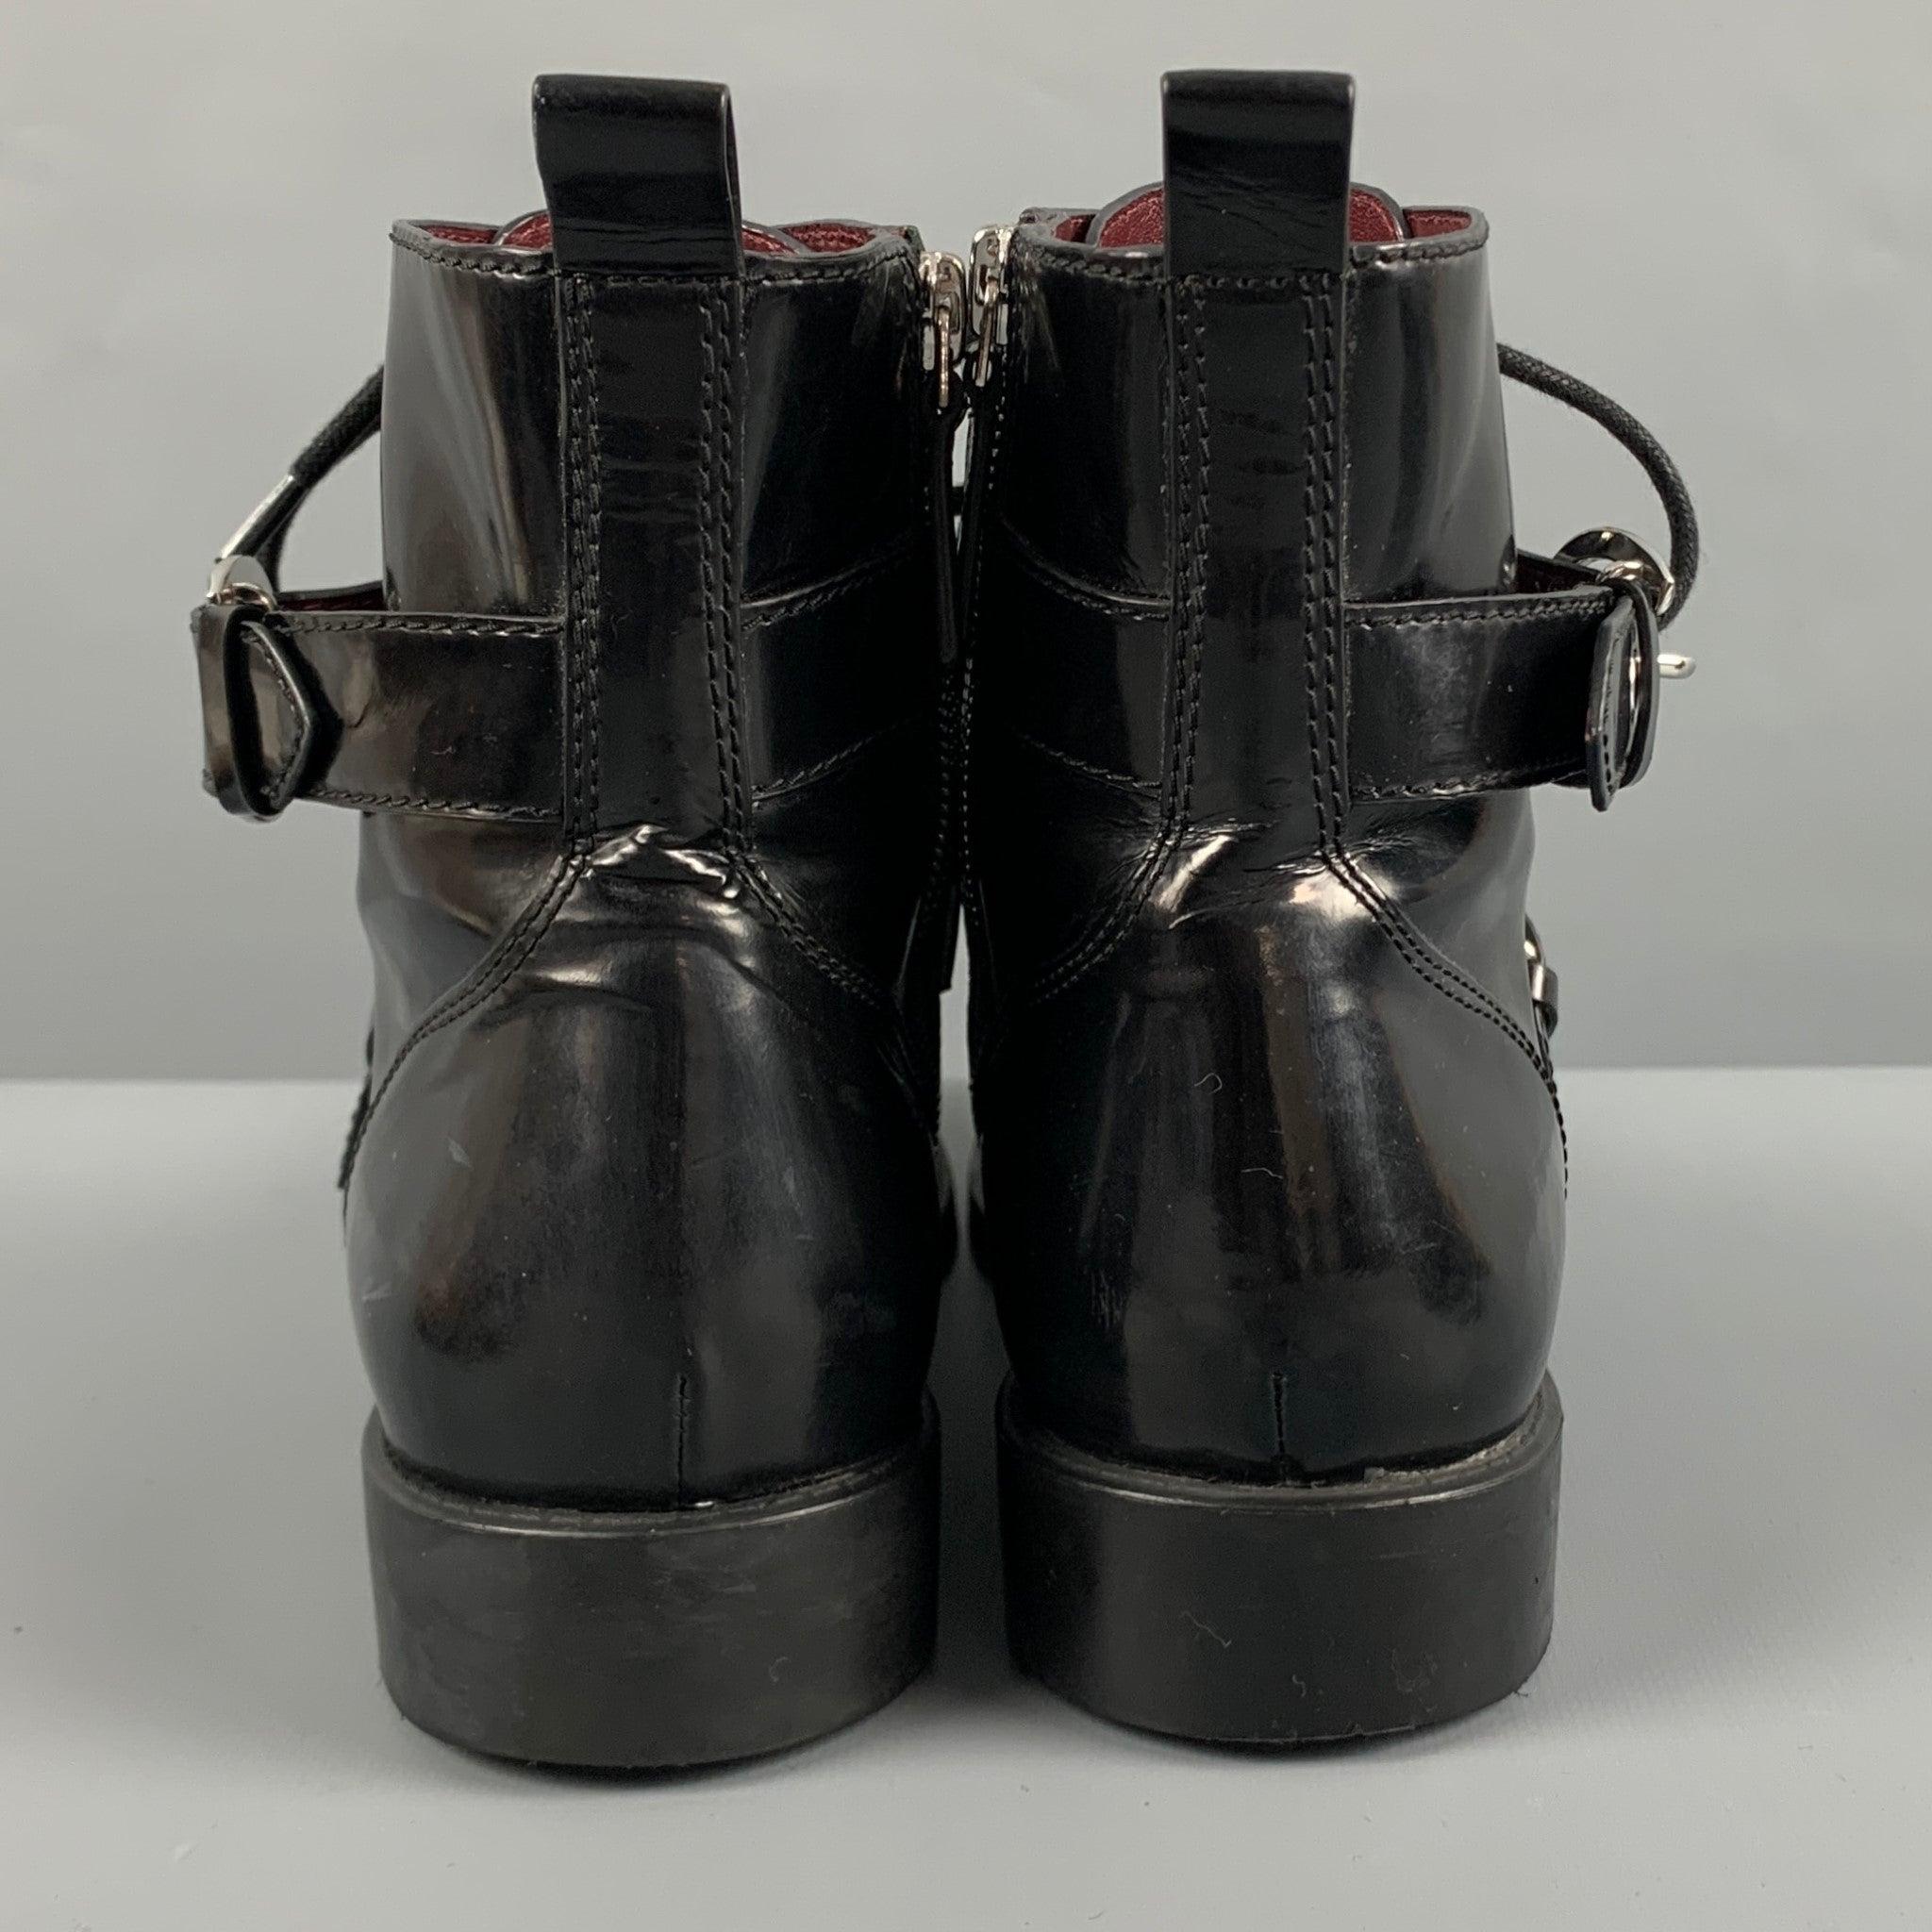 MARC JACOBS Size 9 Black Patent Leather Side Zipper Boots In Good Condition For Sale In San Francisco, CA